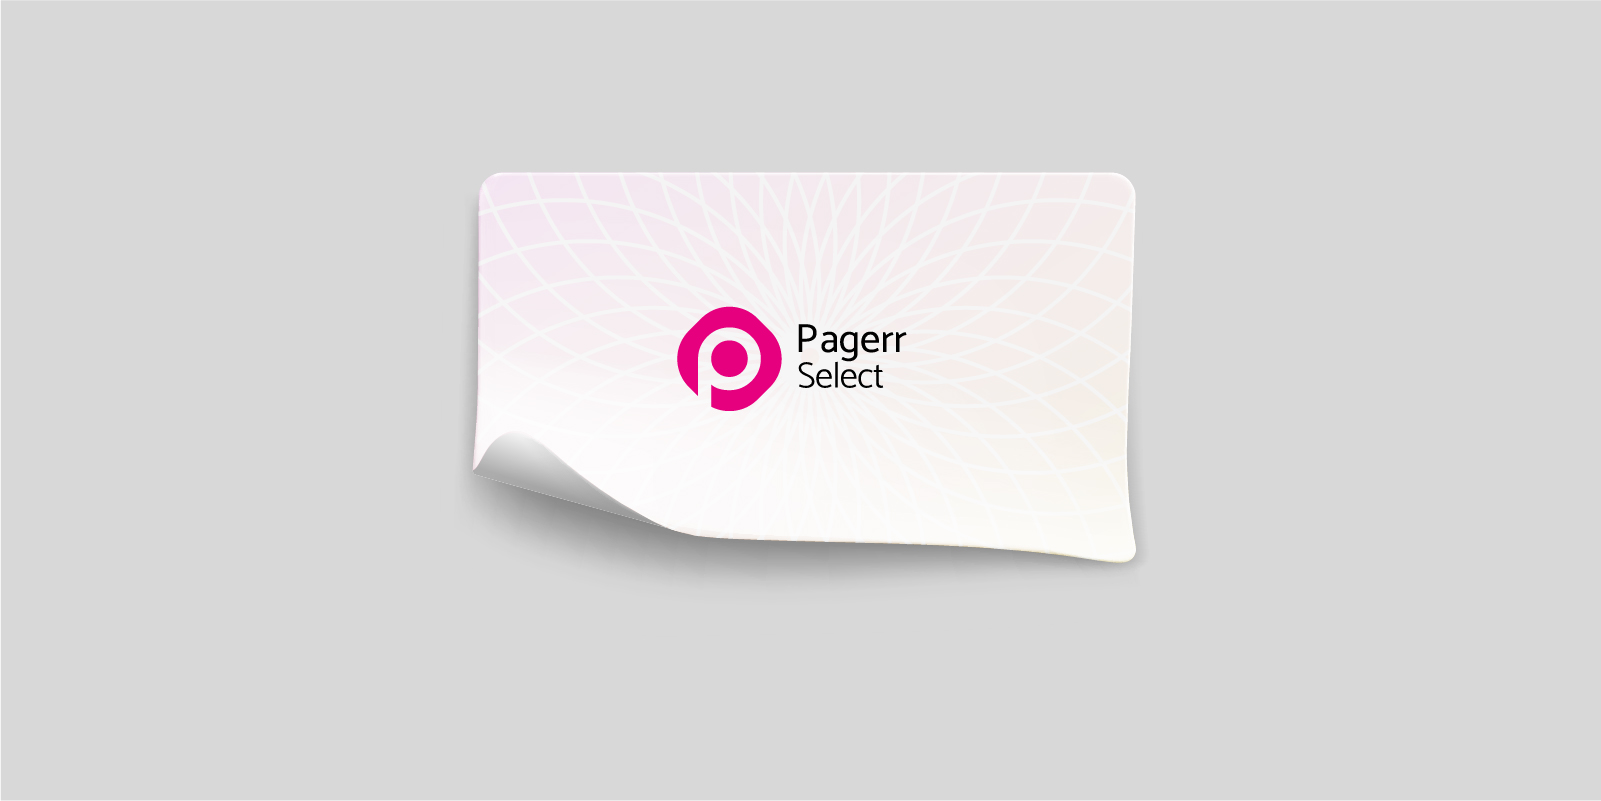 Sheet stickers in Cairns - Print with Pagerr